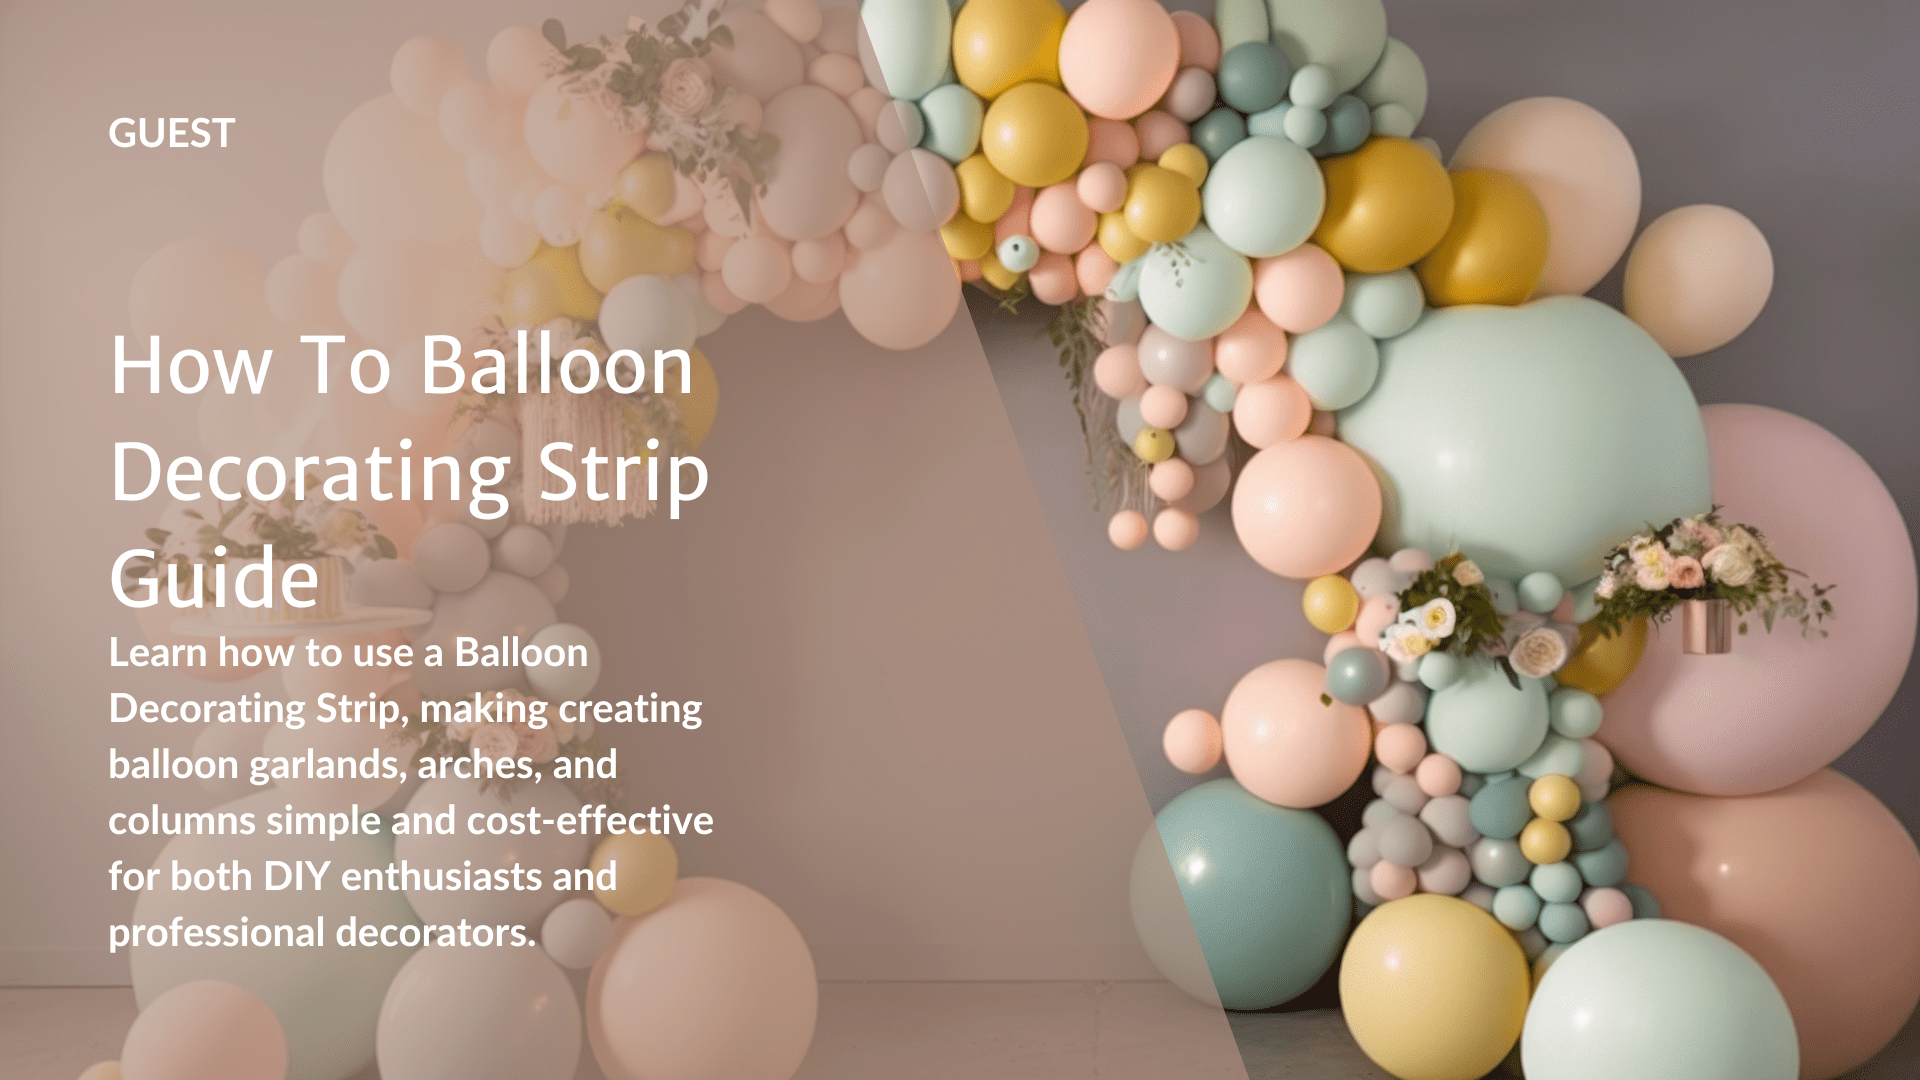 How To Balloon Decorating Strip Guide